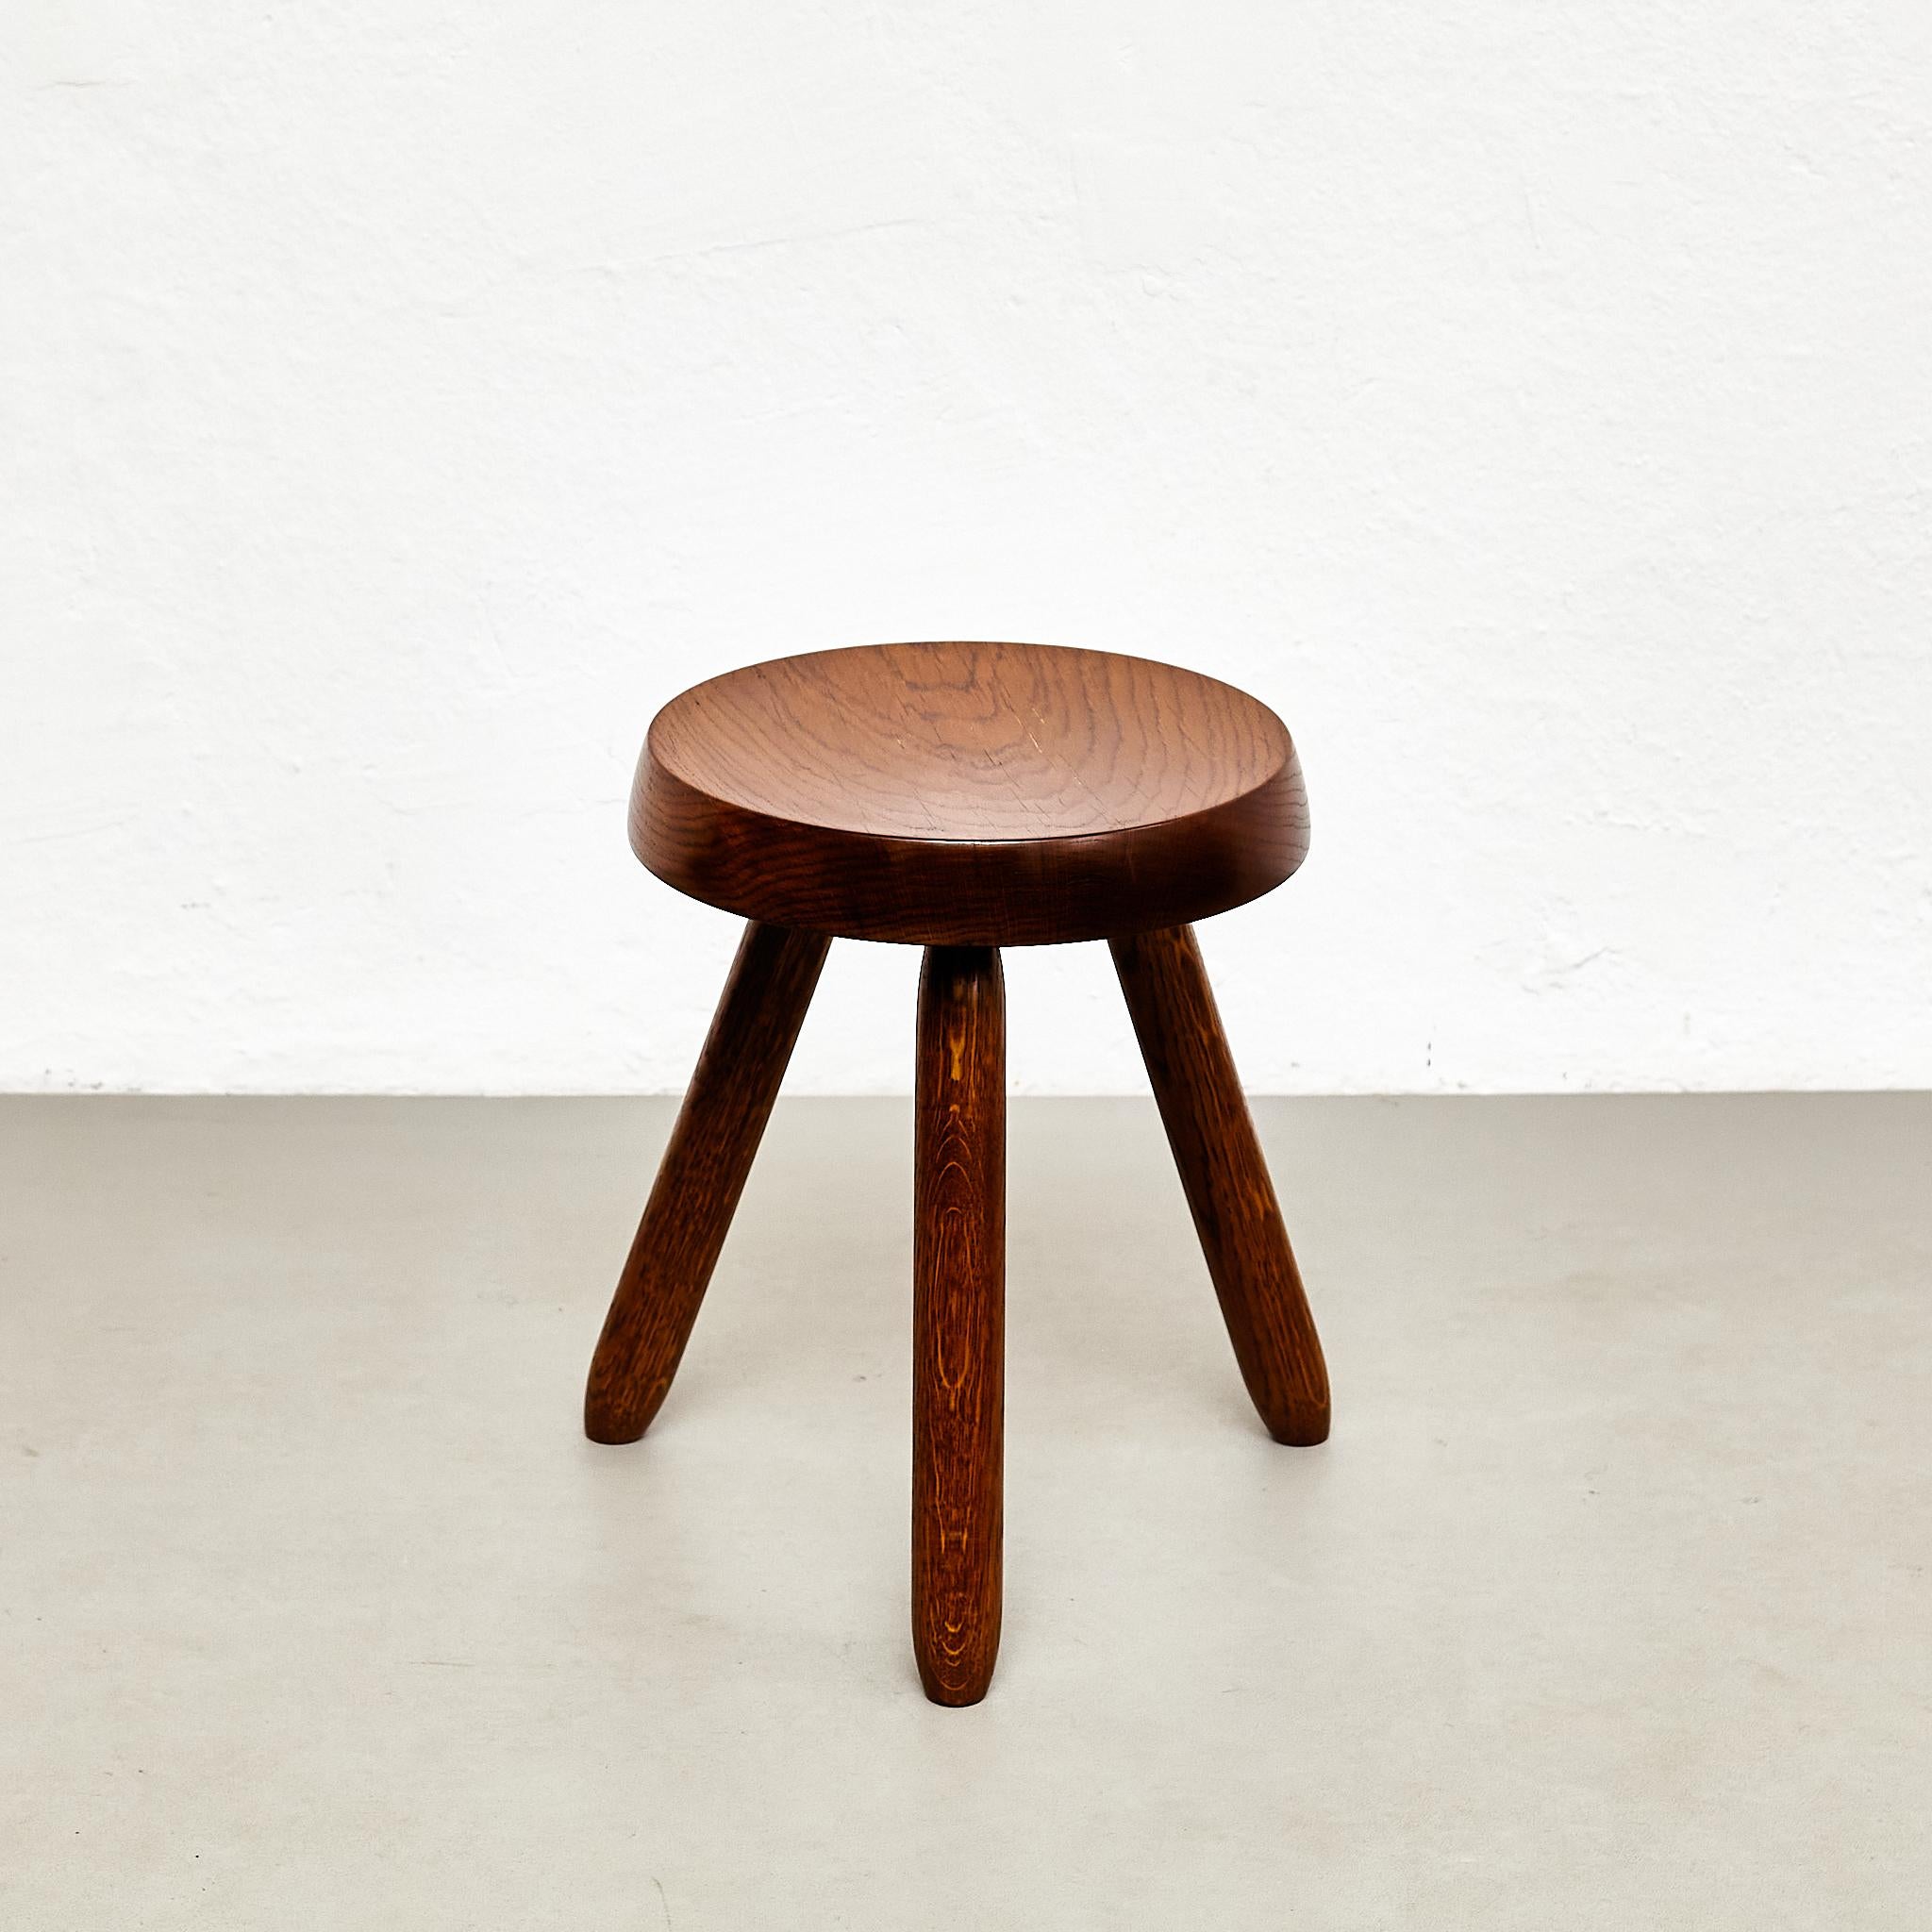 Stool designed in the style of Charlotte Perriand.
Made by unknown manufacturer.

In good original condition, preserving a beautiful patina, with minor wear consistent with age and use. 

Materials:
Wood

Charlotte Perriand (1903-1999) She was born